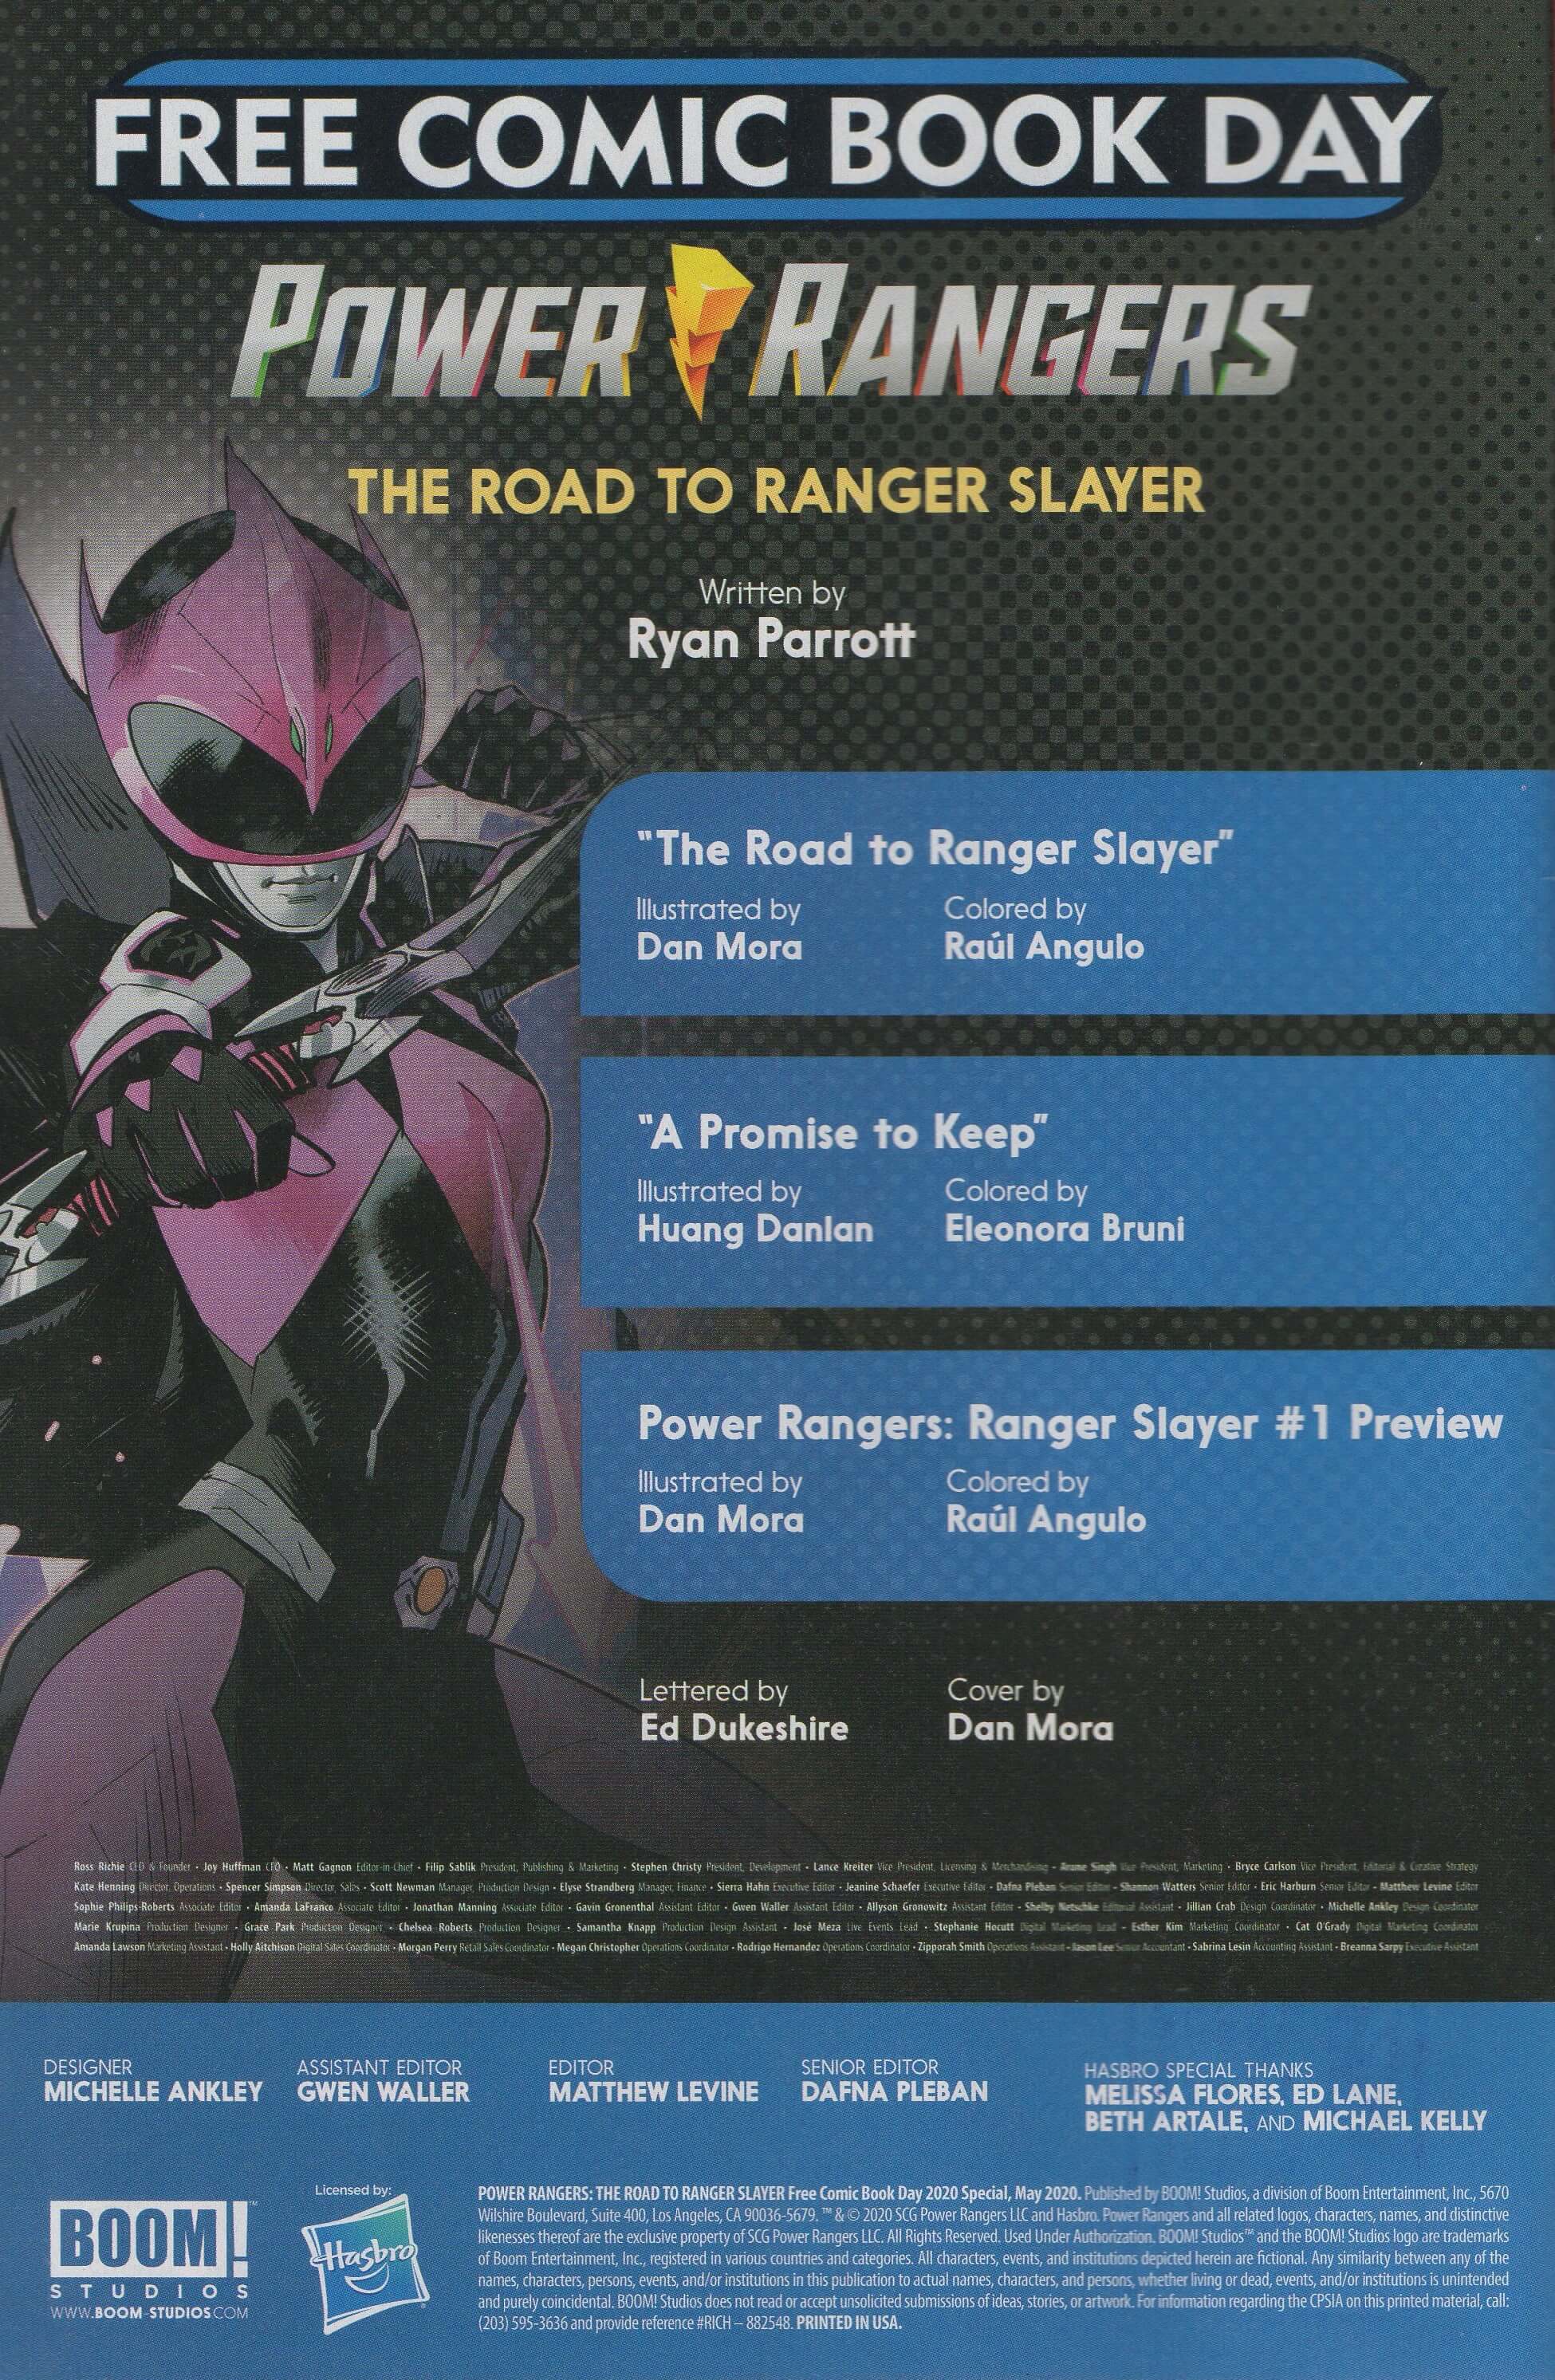 Read online Free Comic Book Day 2020 comic -  Issue # Power Rangers - Road to Ranger Slayer - 2